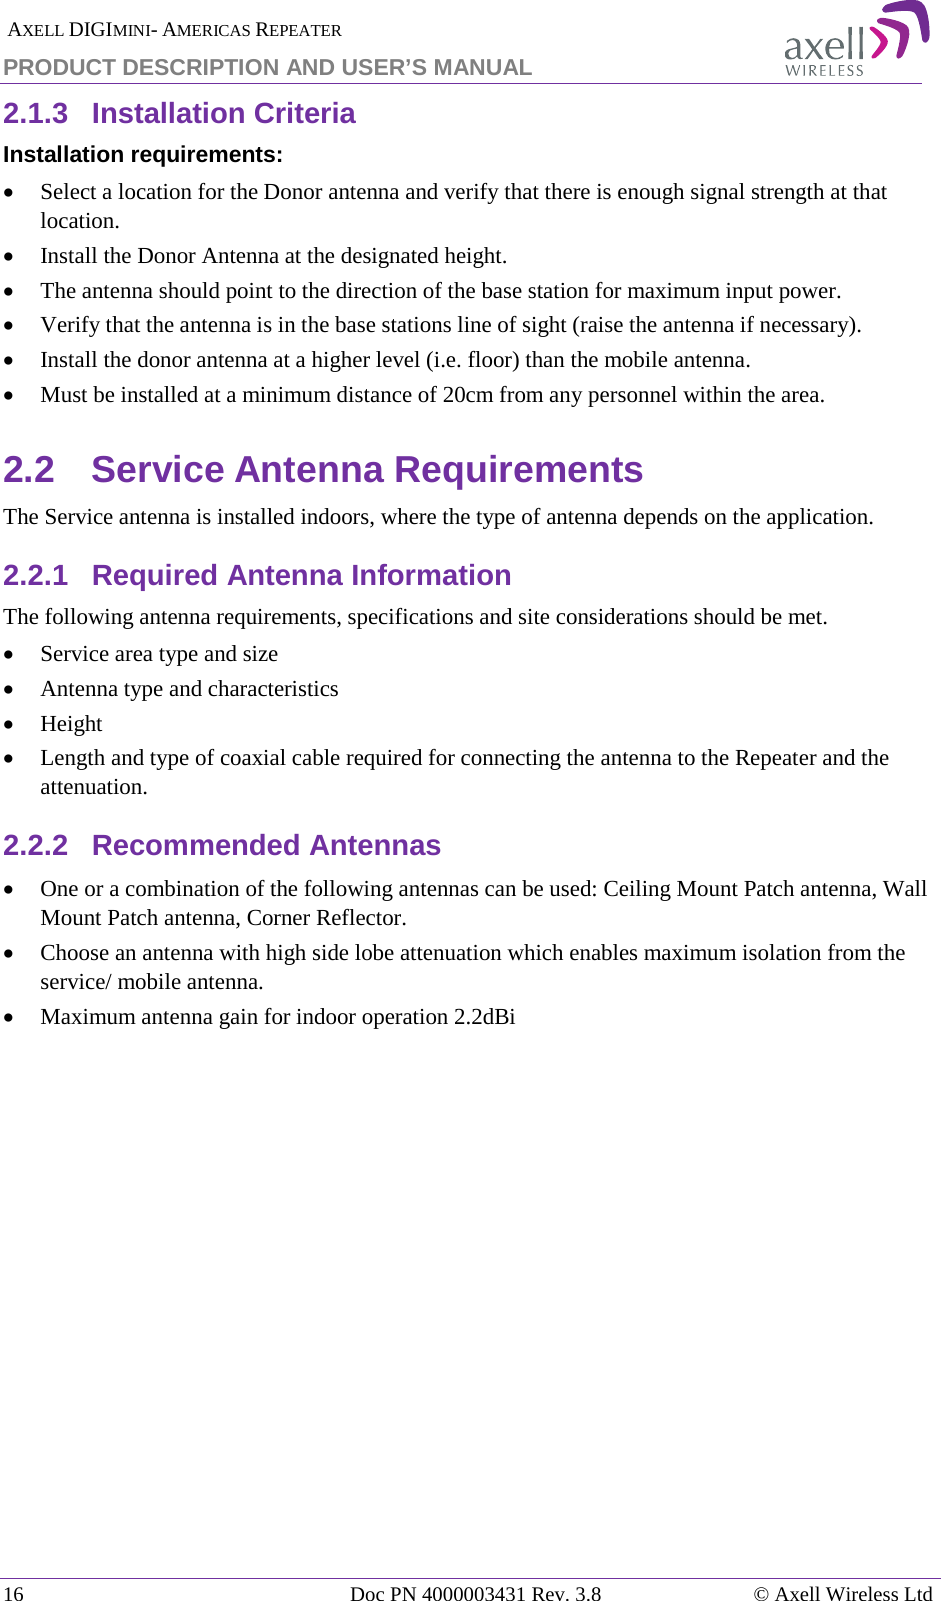  AXELL DIGIMINI- AMERICAS REPEATER PRODUCT DESCRIPTION AND USER’S MANUAL 16   Doc PN 4000003431 Rev. 3.8 © Axell Wireless Ltd 2.1.3  Installation Criteria  Installation requirements: • Select a location for the Donor antenna and verify that there is enough signal strength at that location. • Install the Donor Antenna at the designated height. • The antenna should point to the direction of the base station for maximum input power. • Verify that the antenna is in the base stations line of sight (raise the antenna if necessary).  • Install the donor antenna at a higher level (i.e. floor) than the mobile antenna. • Must be installed at a minimum distance of 20cm from any personnel within the area. 2.2  Service Antenna Requirements The Service antenna is installed indoors, where the type of antenna depends on the application.  2.2.1  Required Antenna Information The following antenna requirements, specifications and site considerations should be met. • Service area type and size  • Antenna type and characteristics • Height • Length and type of coaxial cable required for connecting the antenna to the Repeater and the attenuation. 2.2.2  Recommended Antennas  • One or a combination of the following antennas can be used: Ceiling Mount Patch antenna, Wall Mount Patch antenna, Corner Reflector. • Choose an antenna with high side lobe attenuation which enables maximum isolation from the service/ mobile antenna. • Maximum antenna gain for indoor operation 2.2dBi   